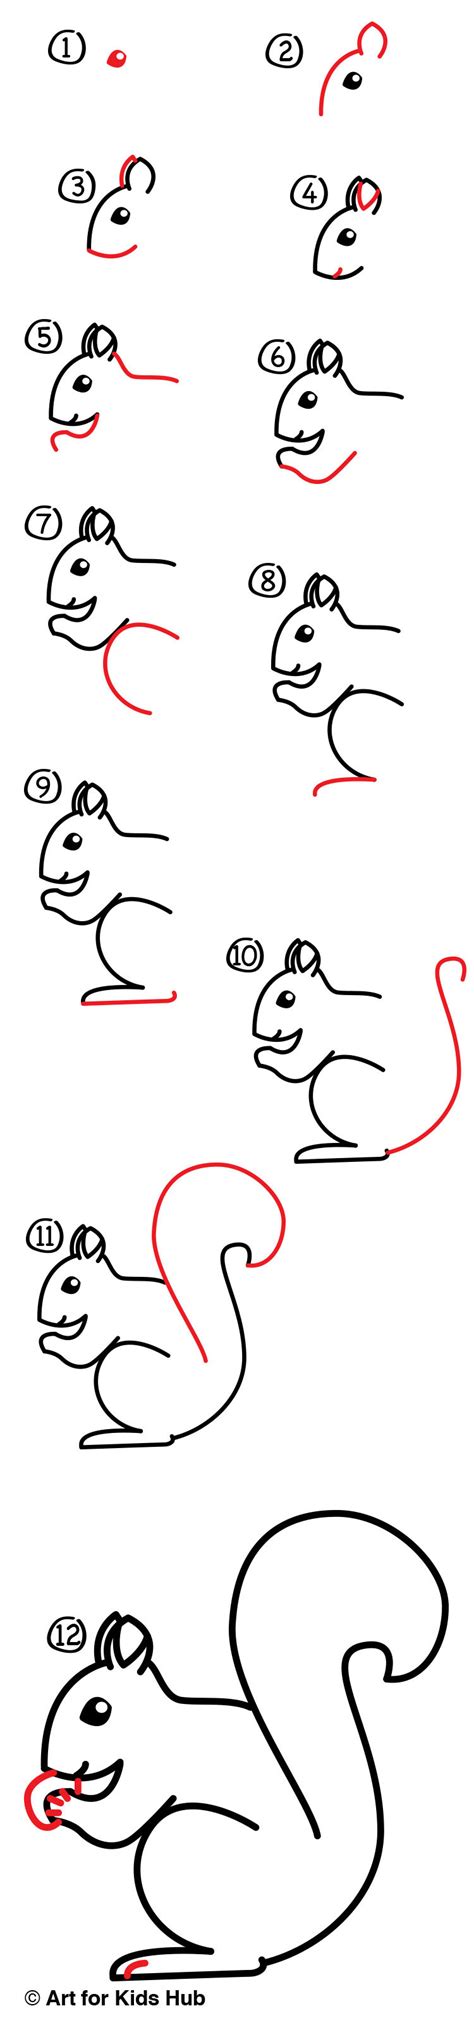 How To Draw A Squirrel Sya Art For Kids Hub